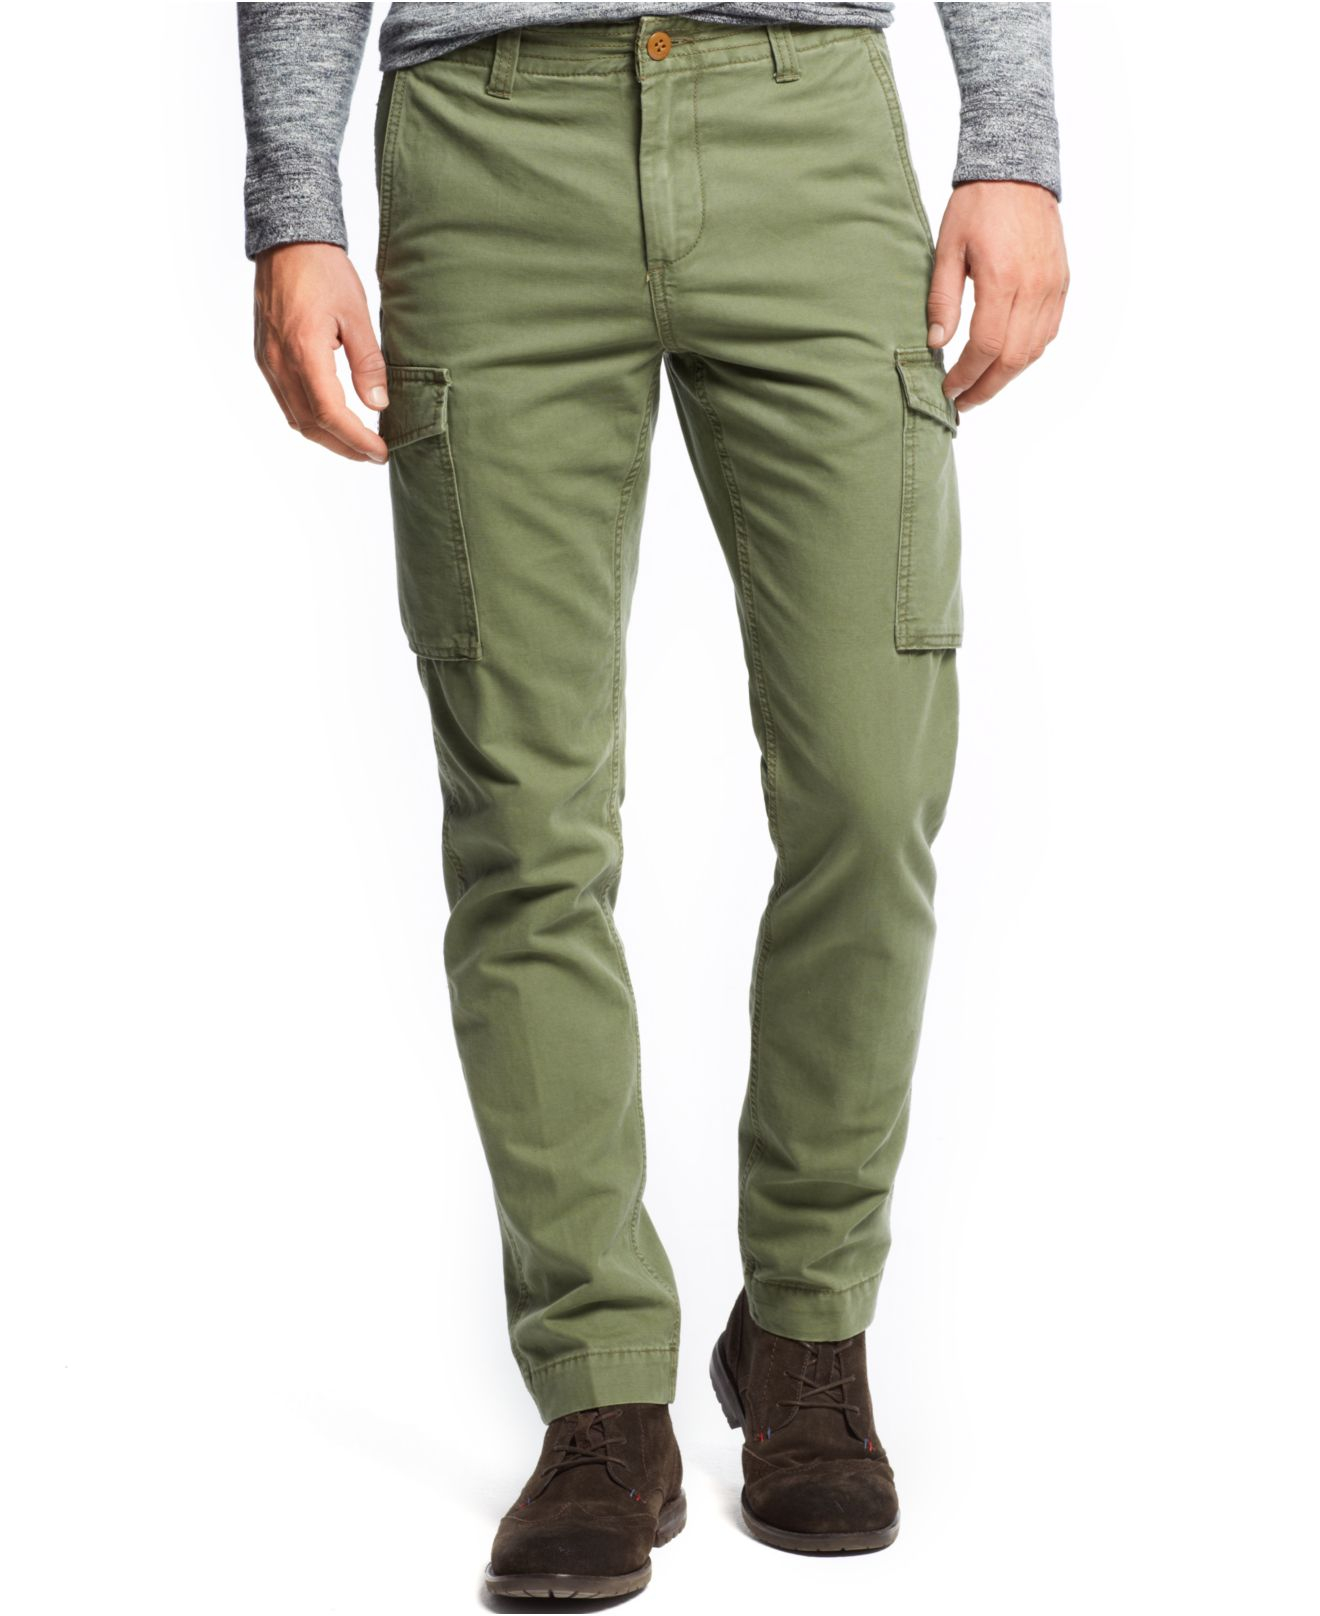 tommy cargo pants Cheaper Than Retail 